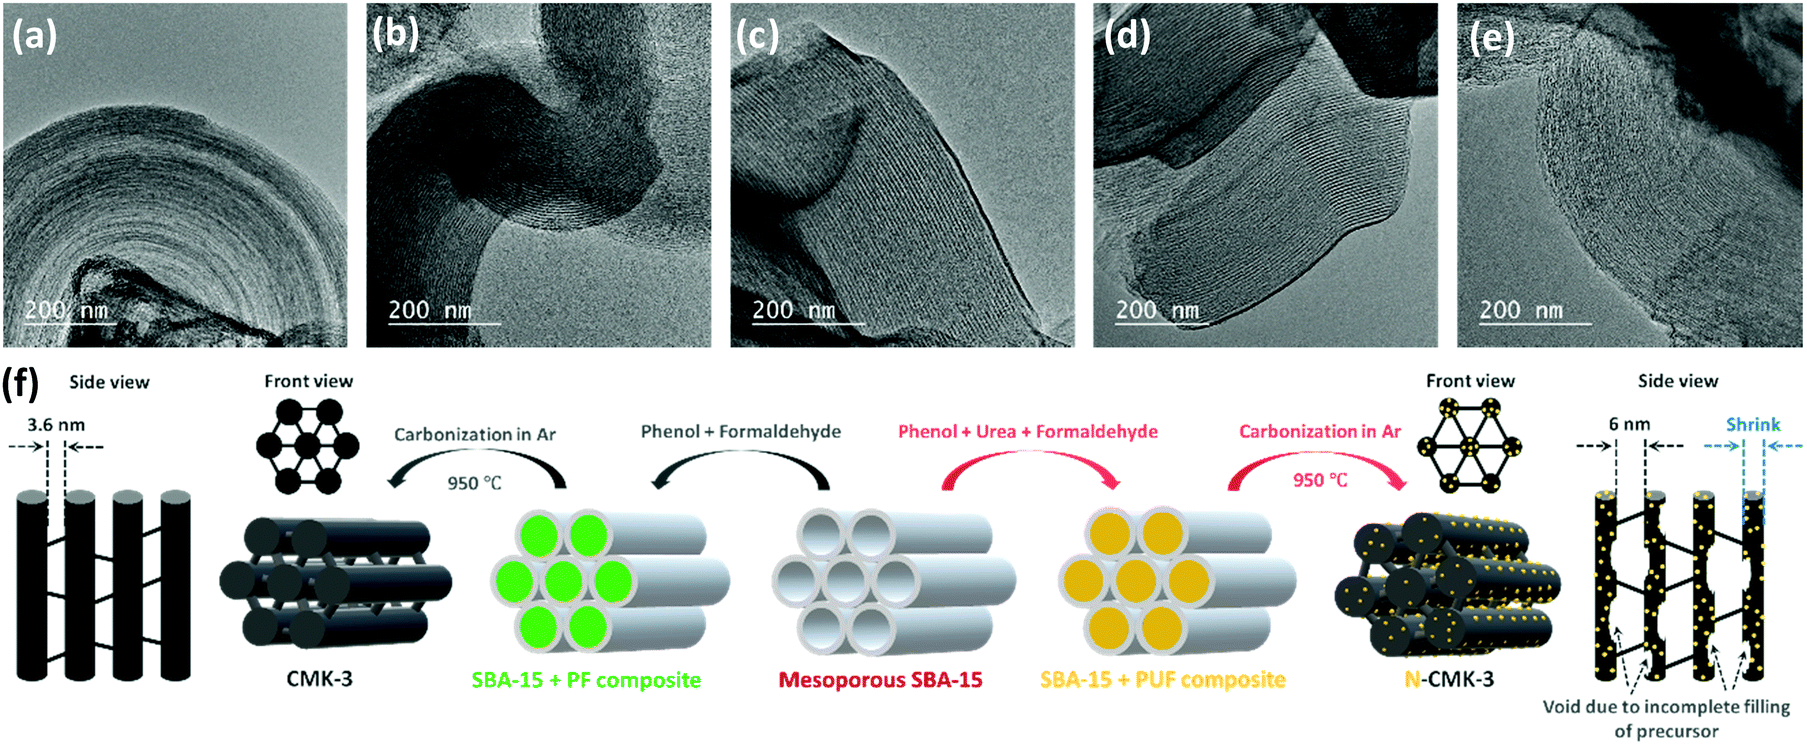 Nanoconfined Growth Of Lithium Peroxide Inside Electrode Pores A Noncatalytic Strategy Toward Mitigating Capacity Rechargeability Trade Off In Lithiu Materials Advances Rsc Publishing Doi 10 1039 D0mab